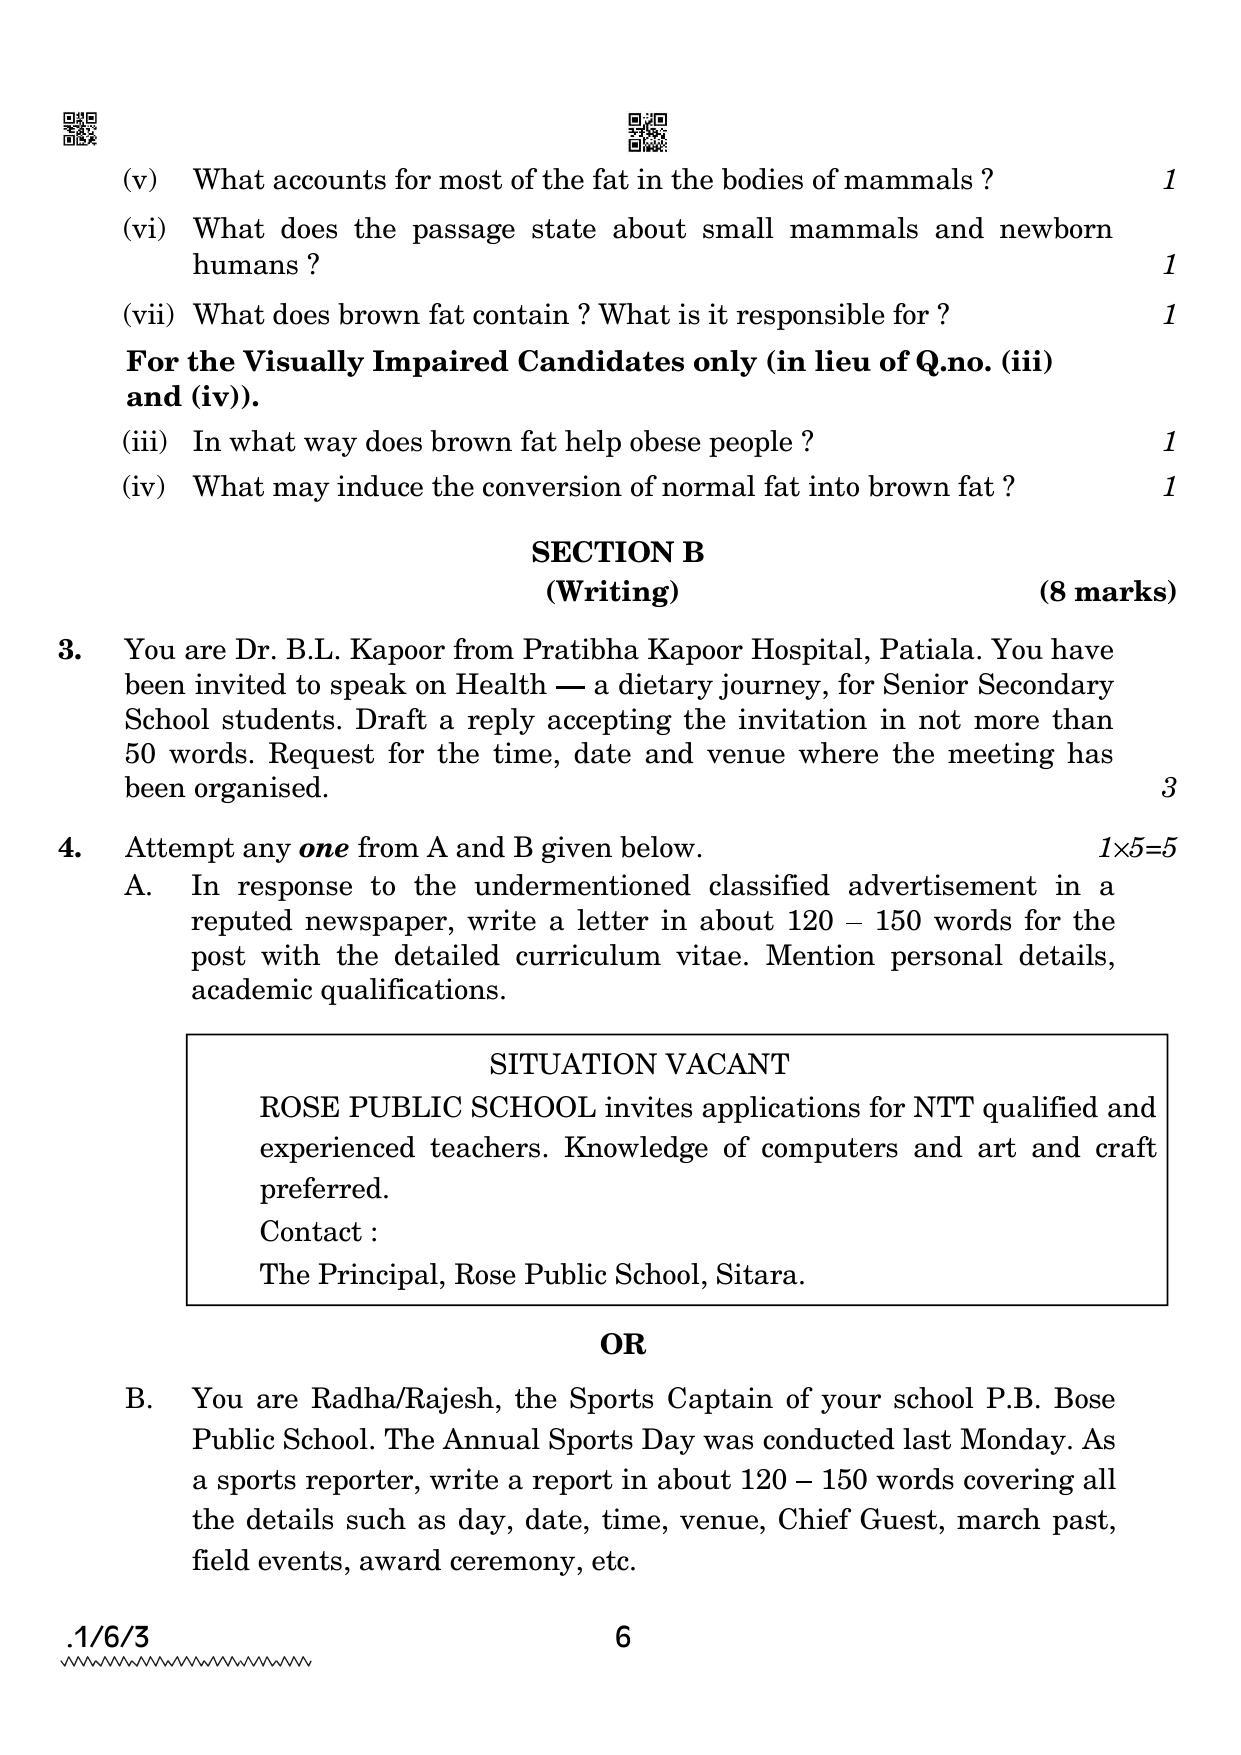 CBSE Class 12 1-6-3 ENGLISH CORE 2022 Compartment Question Paper - Page 6